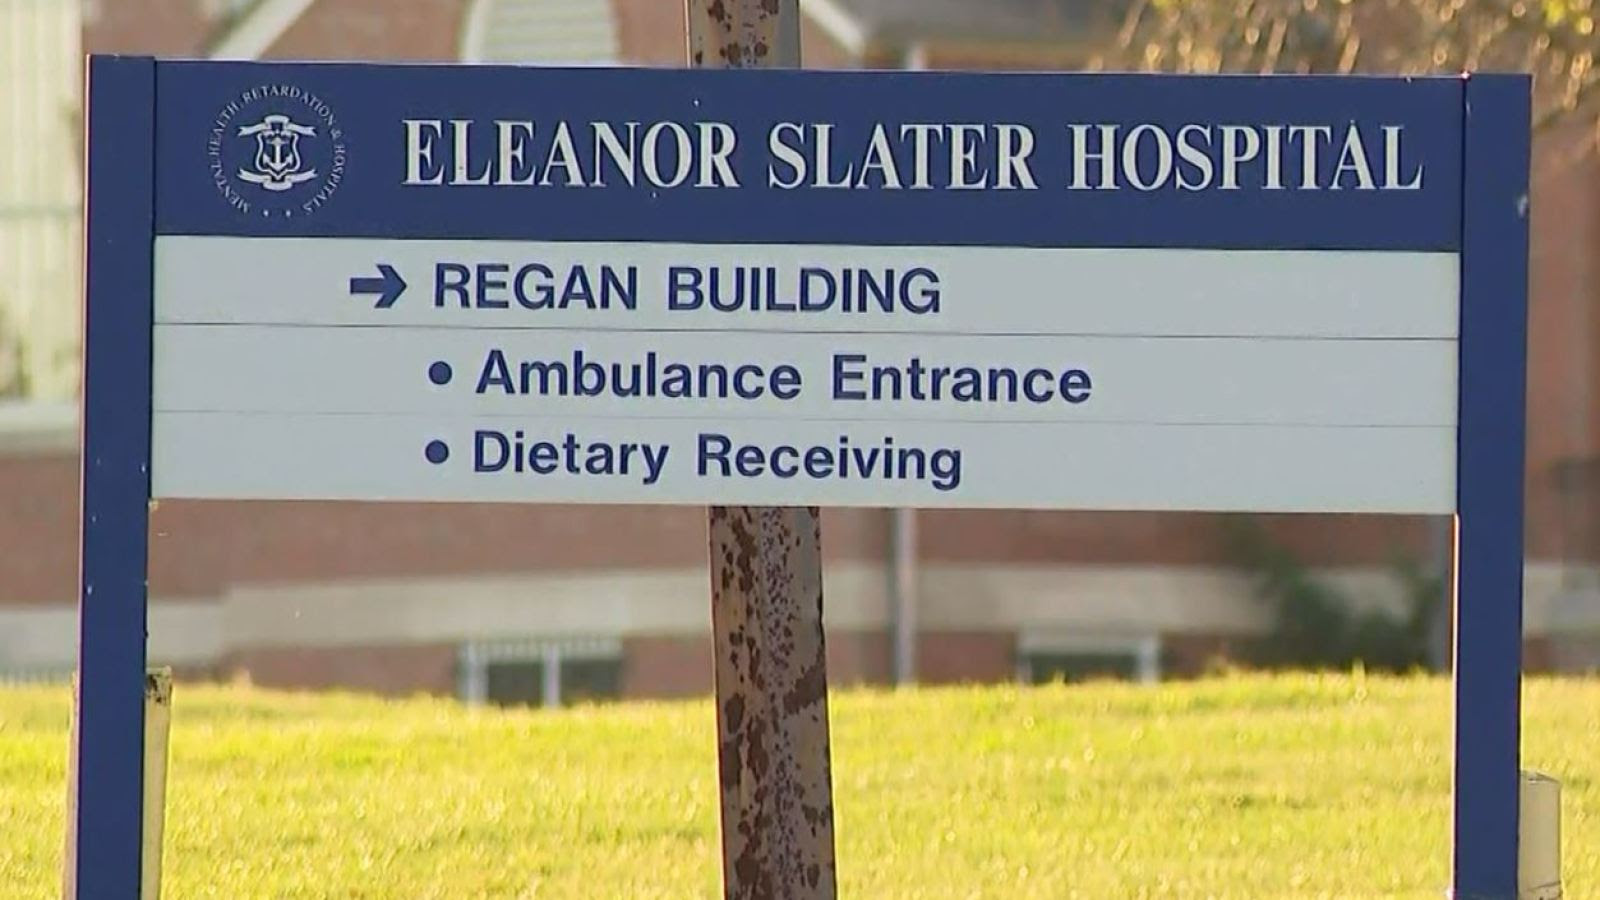 Eleanor Slater still out of compliance, ineligible for federal funds